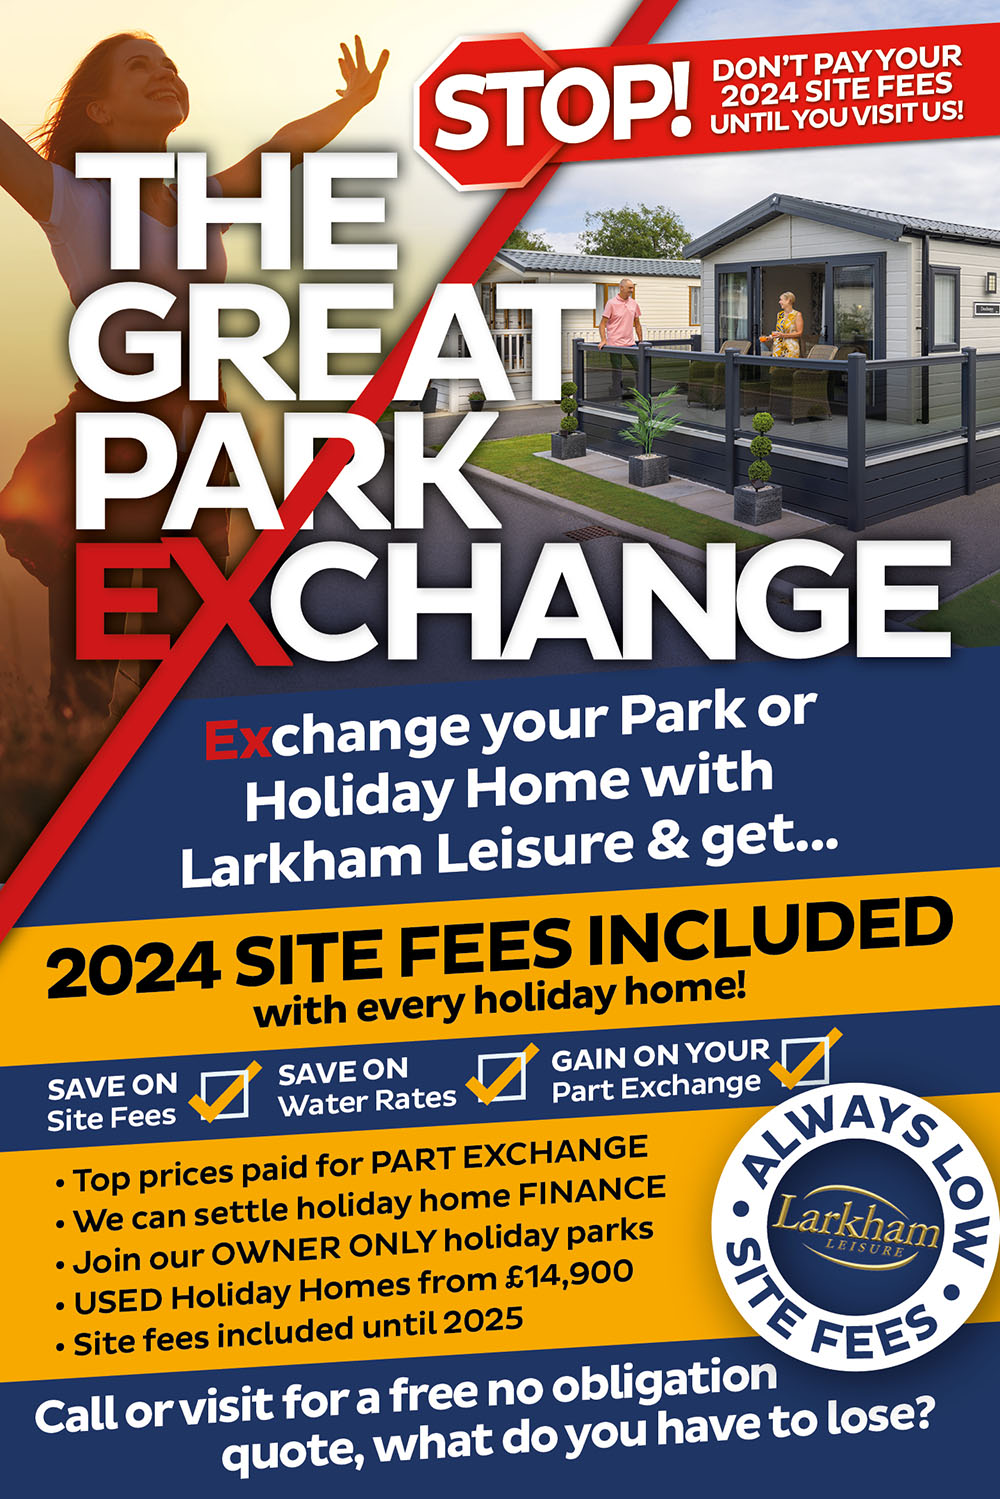 Exchange your park of holiday home with Larkham Leisure and get 2024 site fees included with every holiday home.